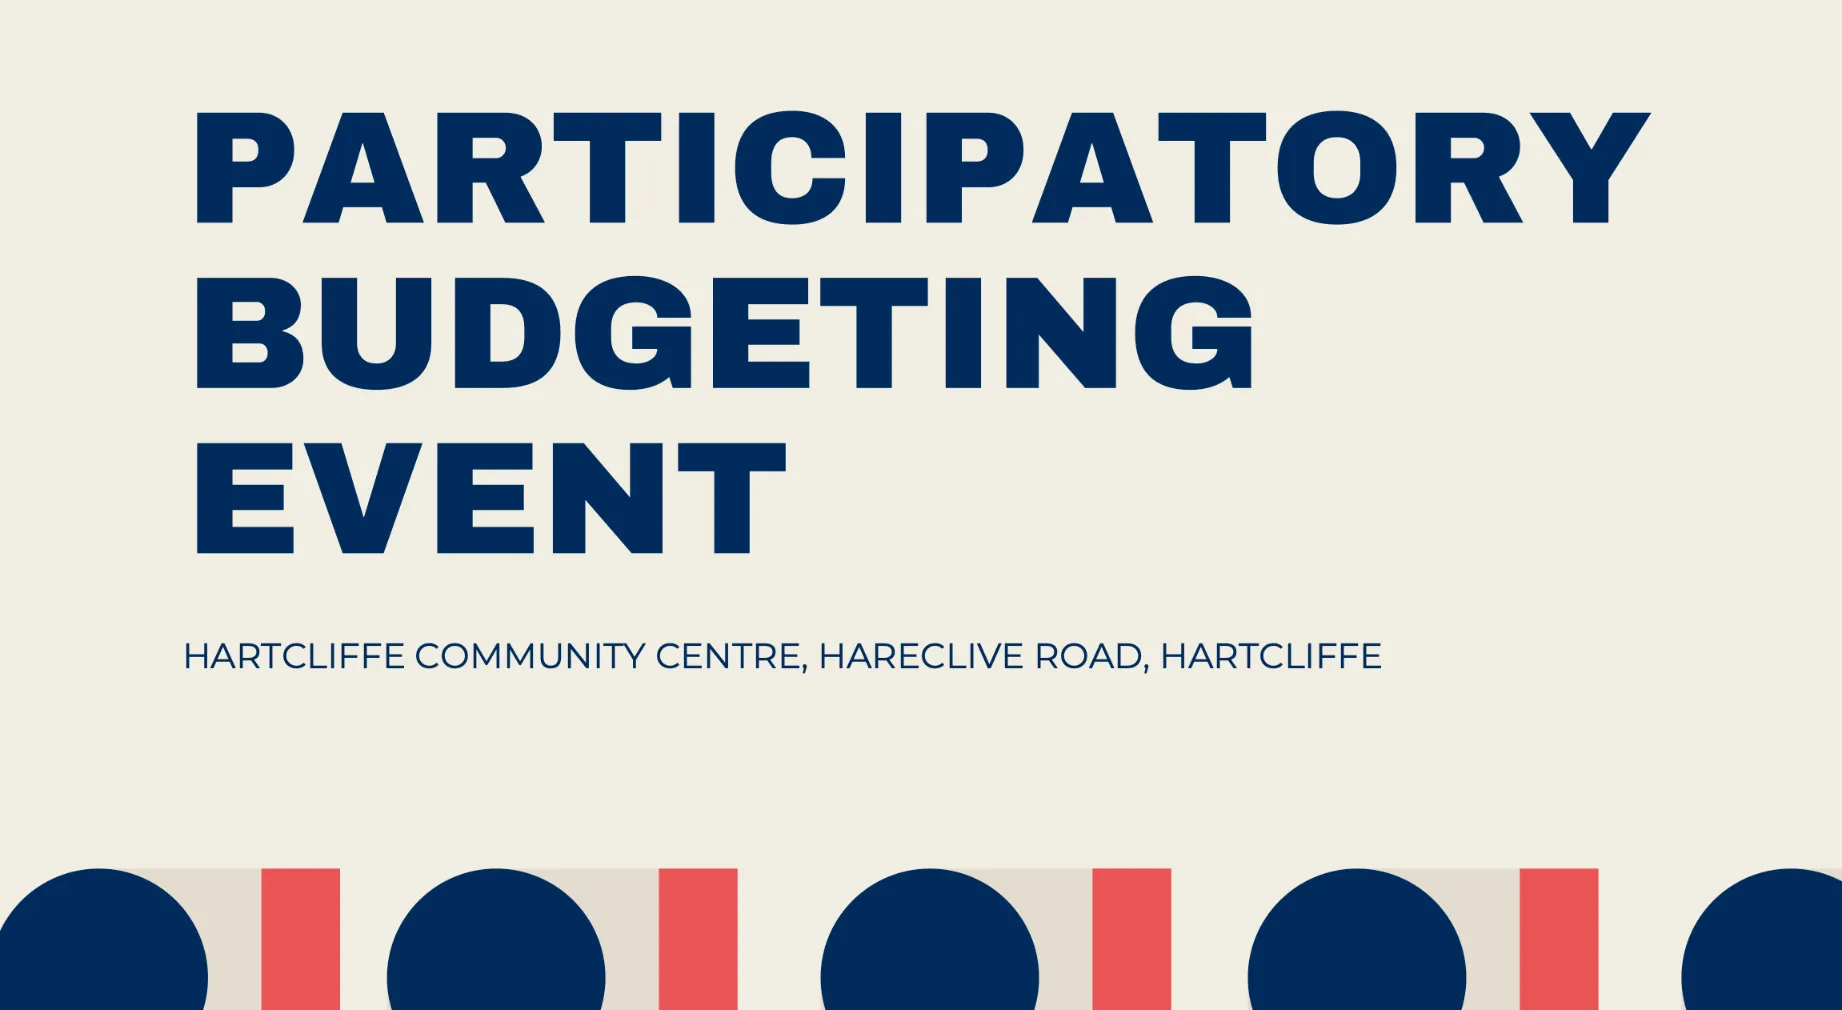 Title section of the budgeting event booklet